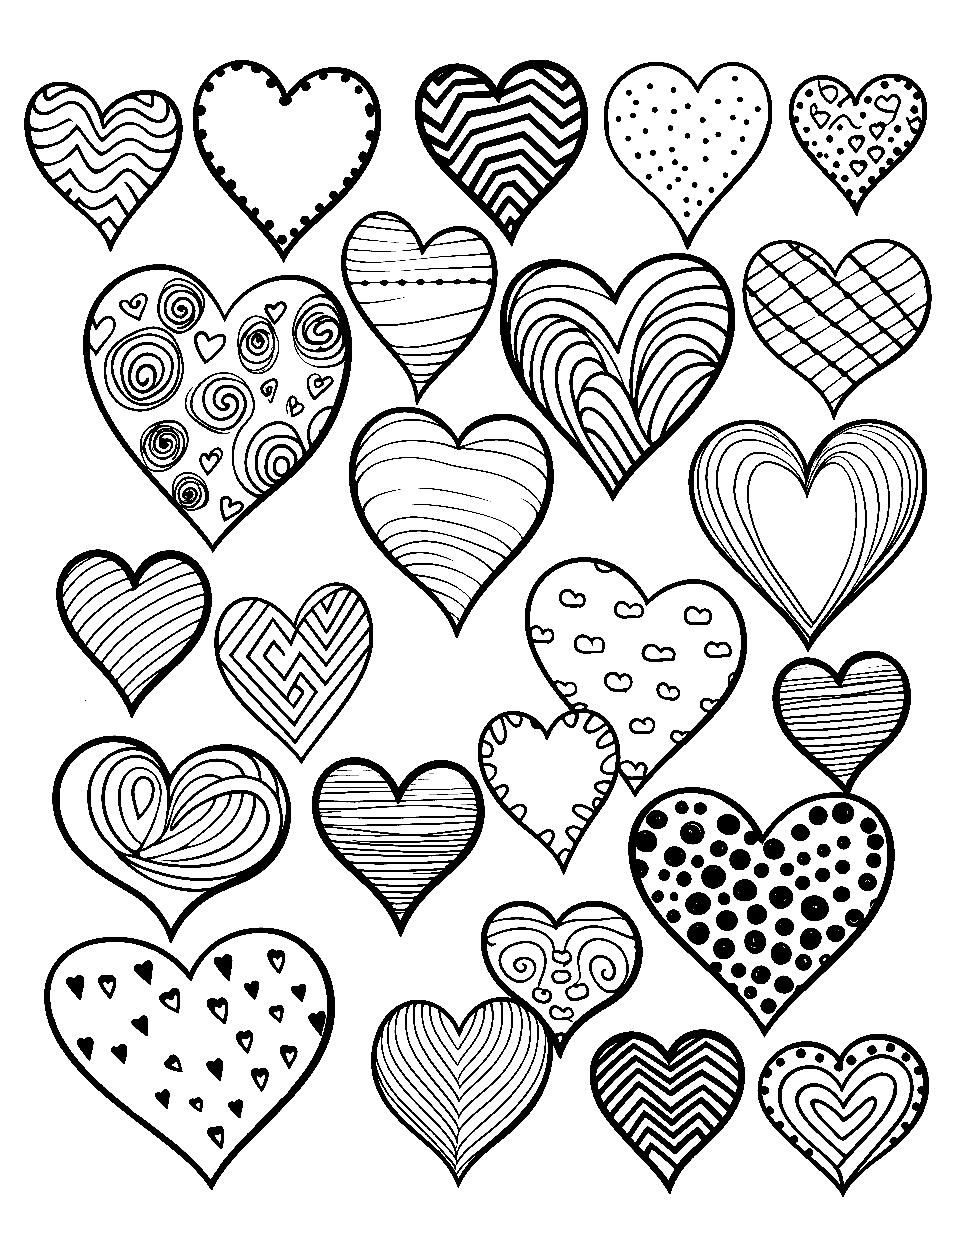 Heart Coloring Medley Coloring Page - Various sizes of hearts, each with a unique pattern.